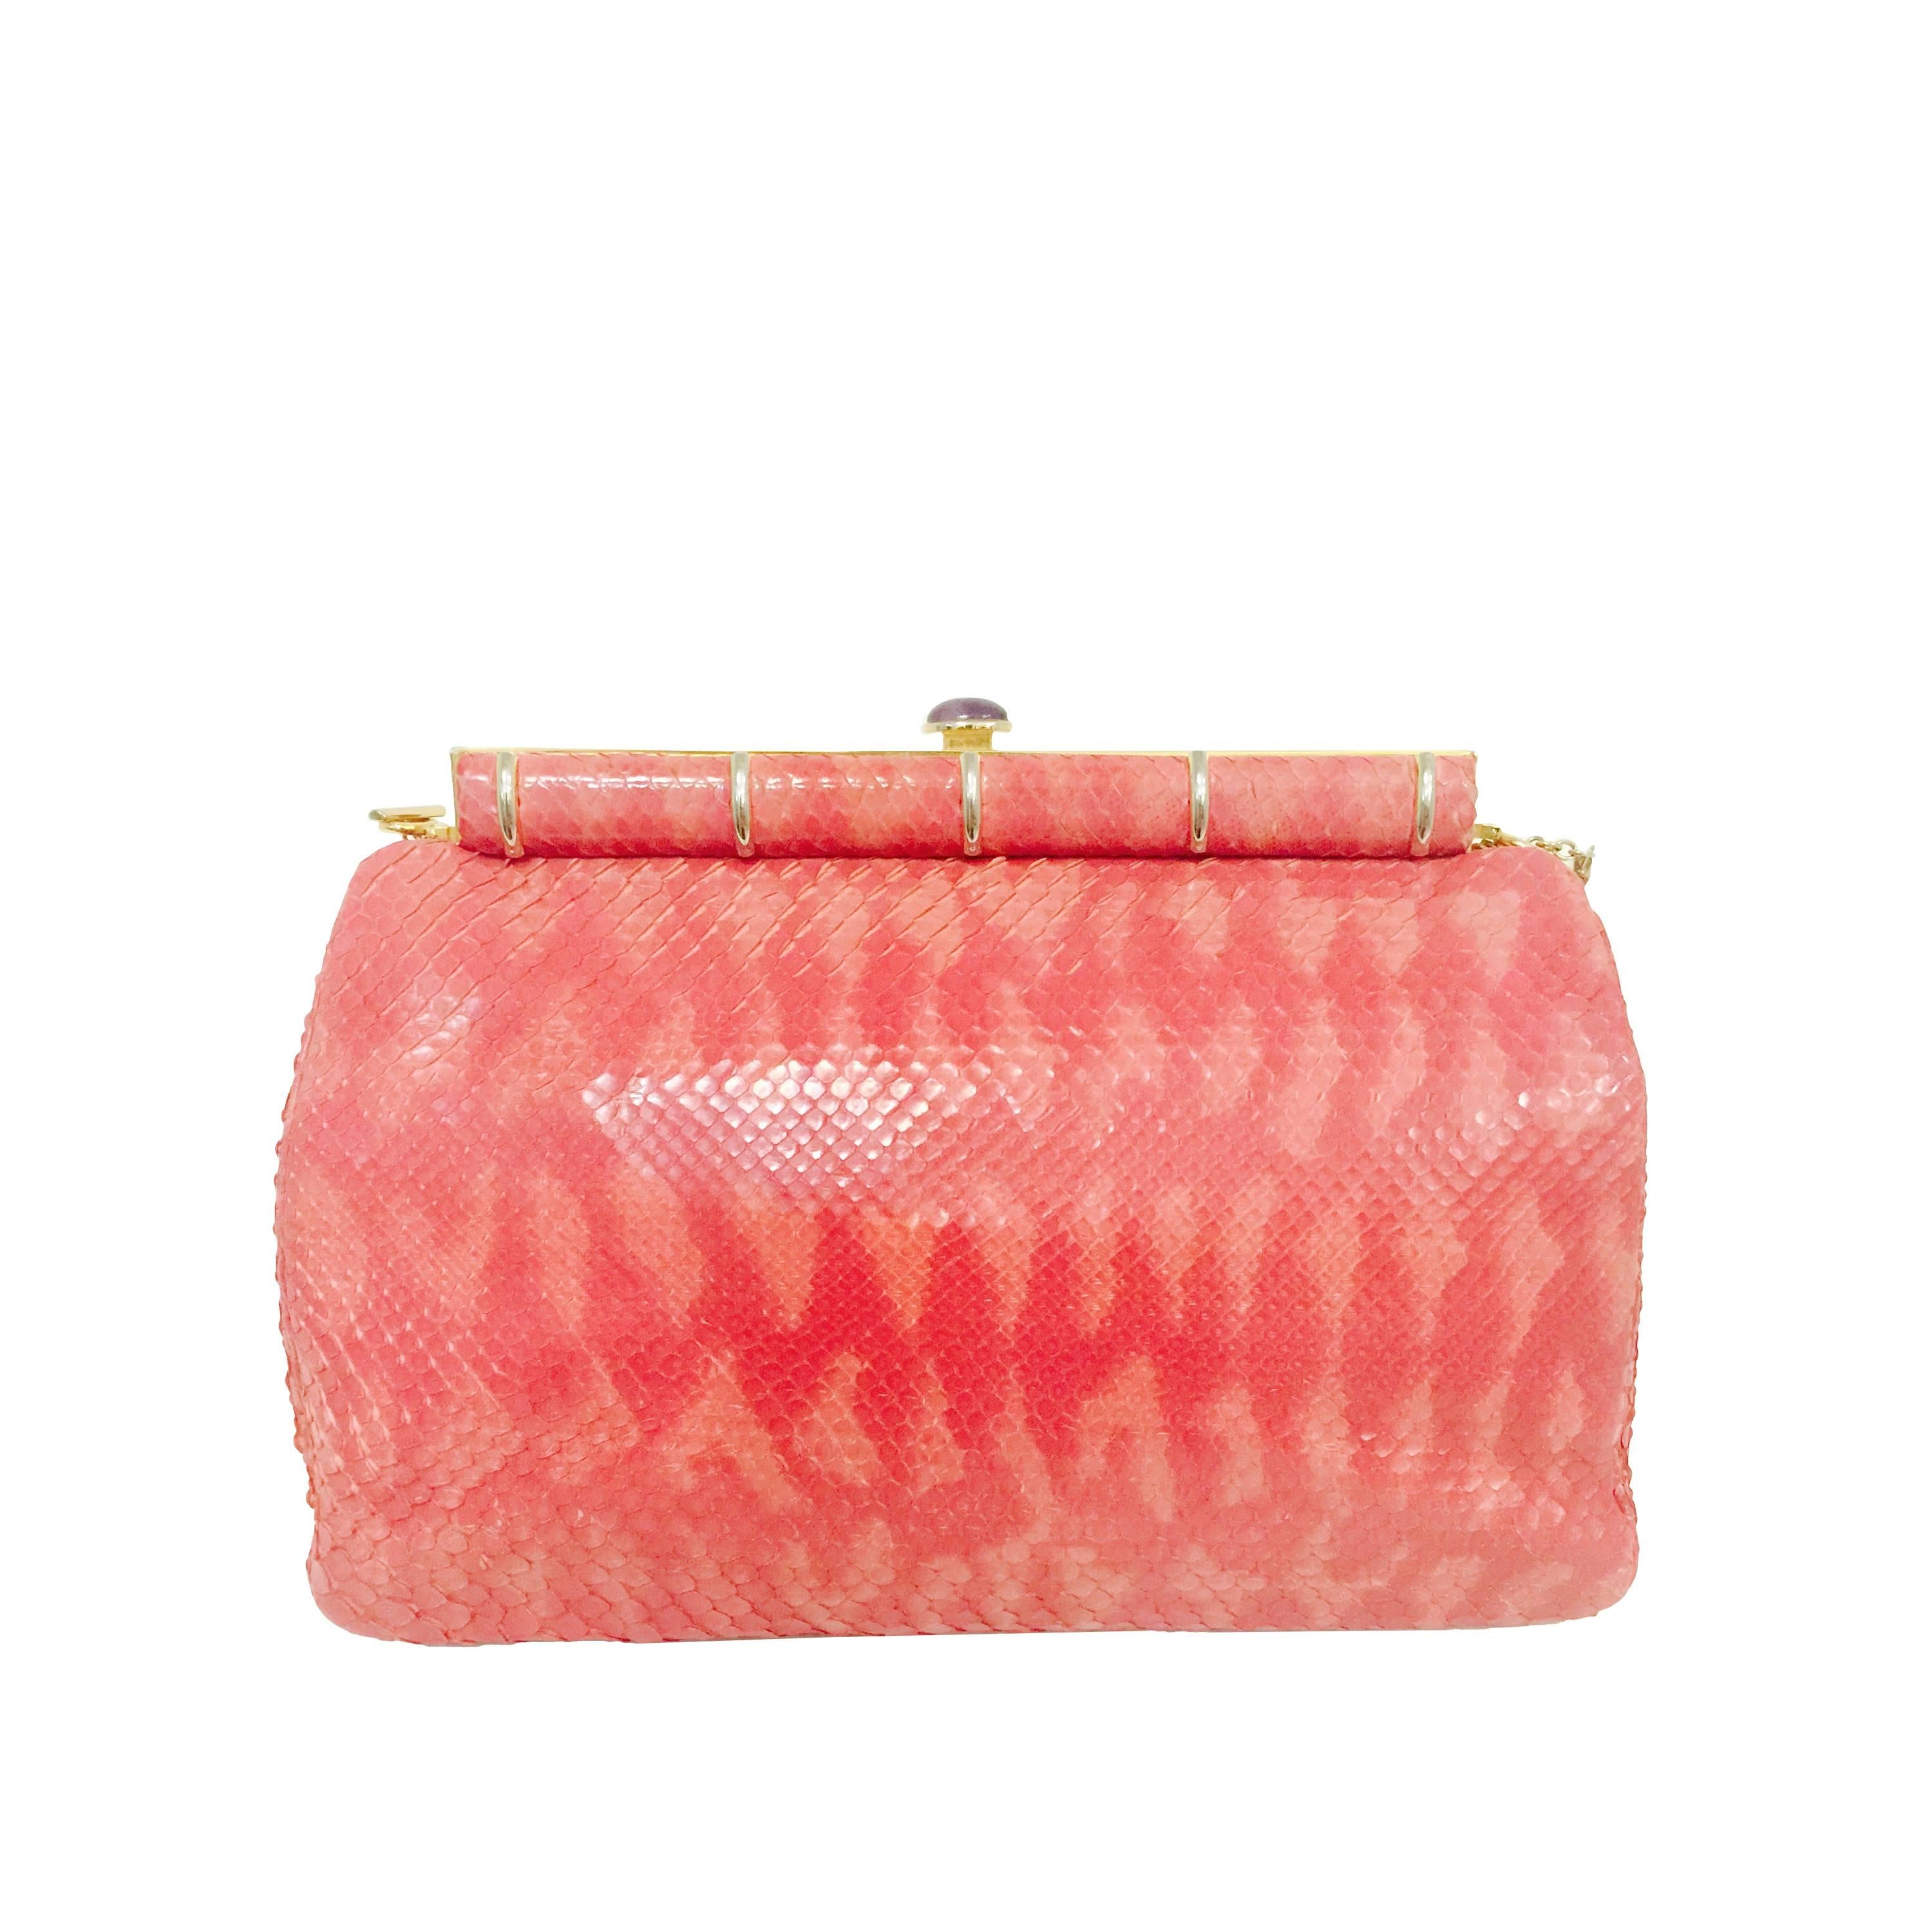 Judith Leiber Pink Python Shoulder Bag With Jeweled Clasp  For Sale